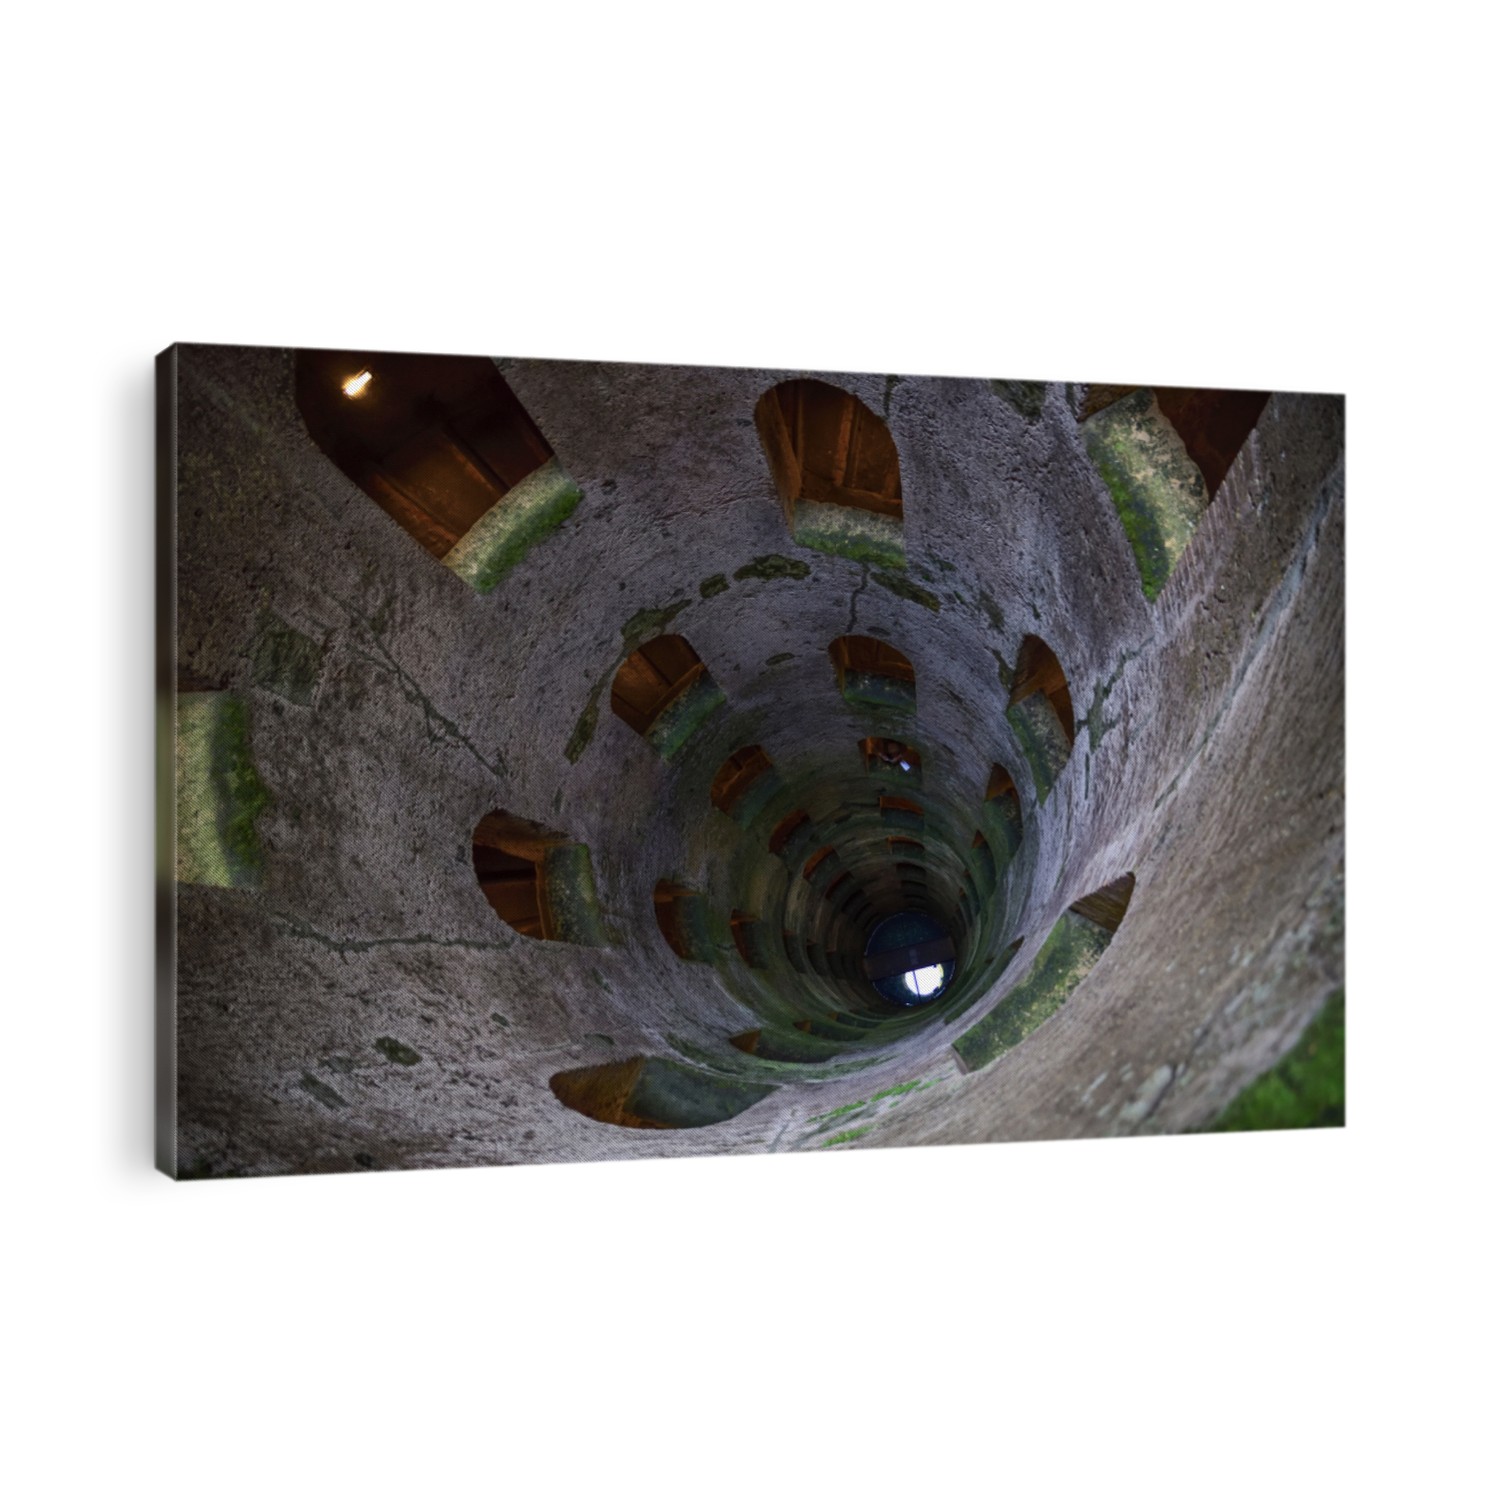 St. Patrick's well, Orvieto, Italy. Historic well. Great engineering work, built in 1547. depth 54 meters, width 13 meters .. characteristics are the spiral stairs